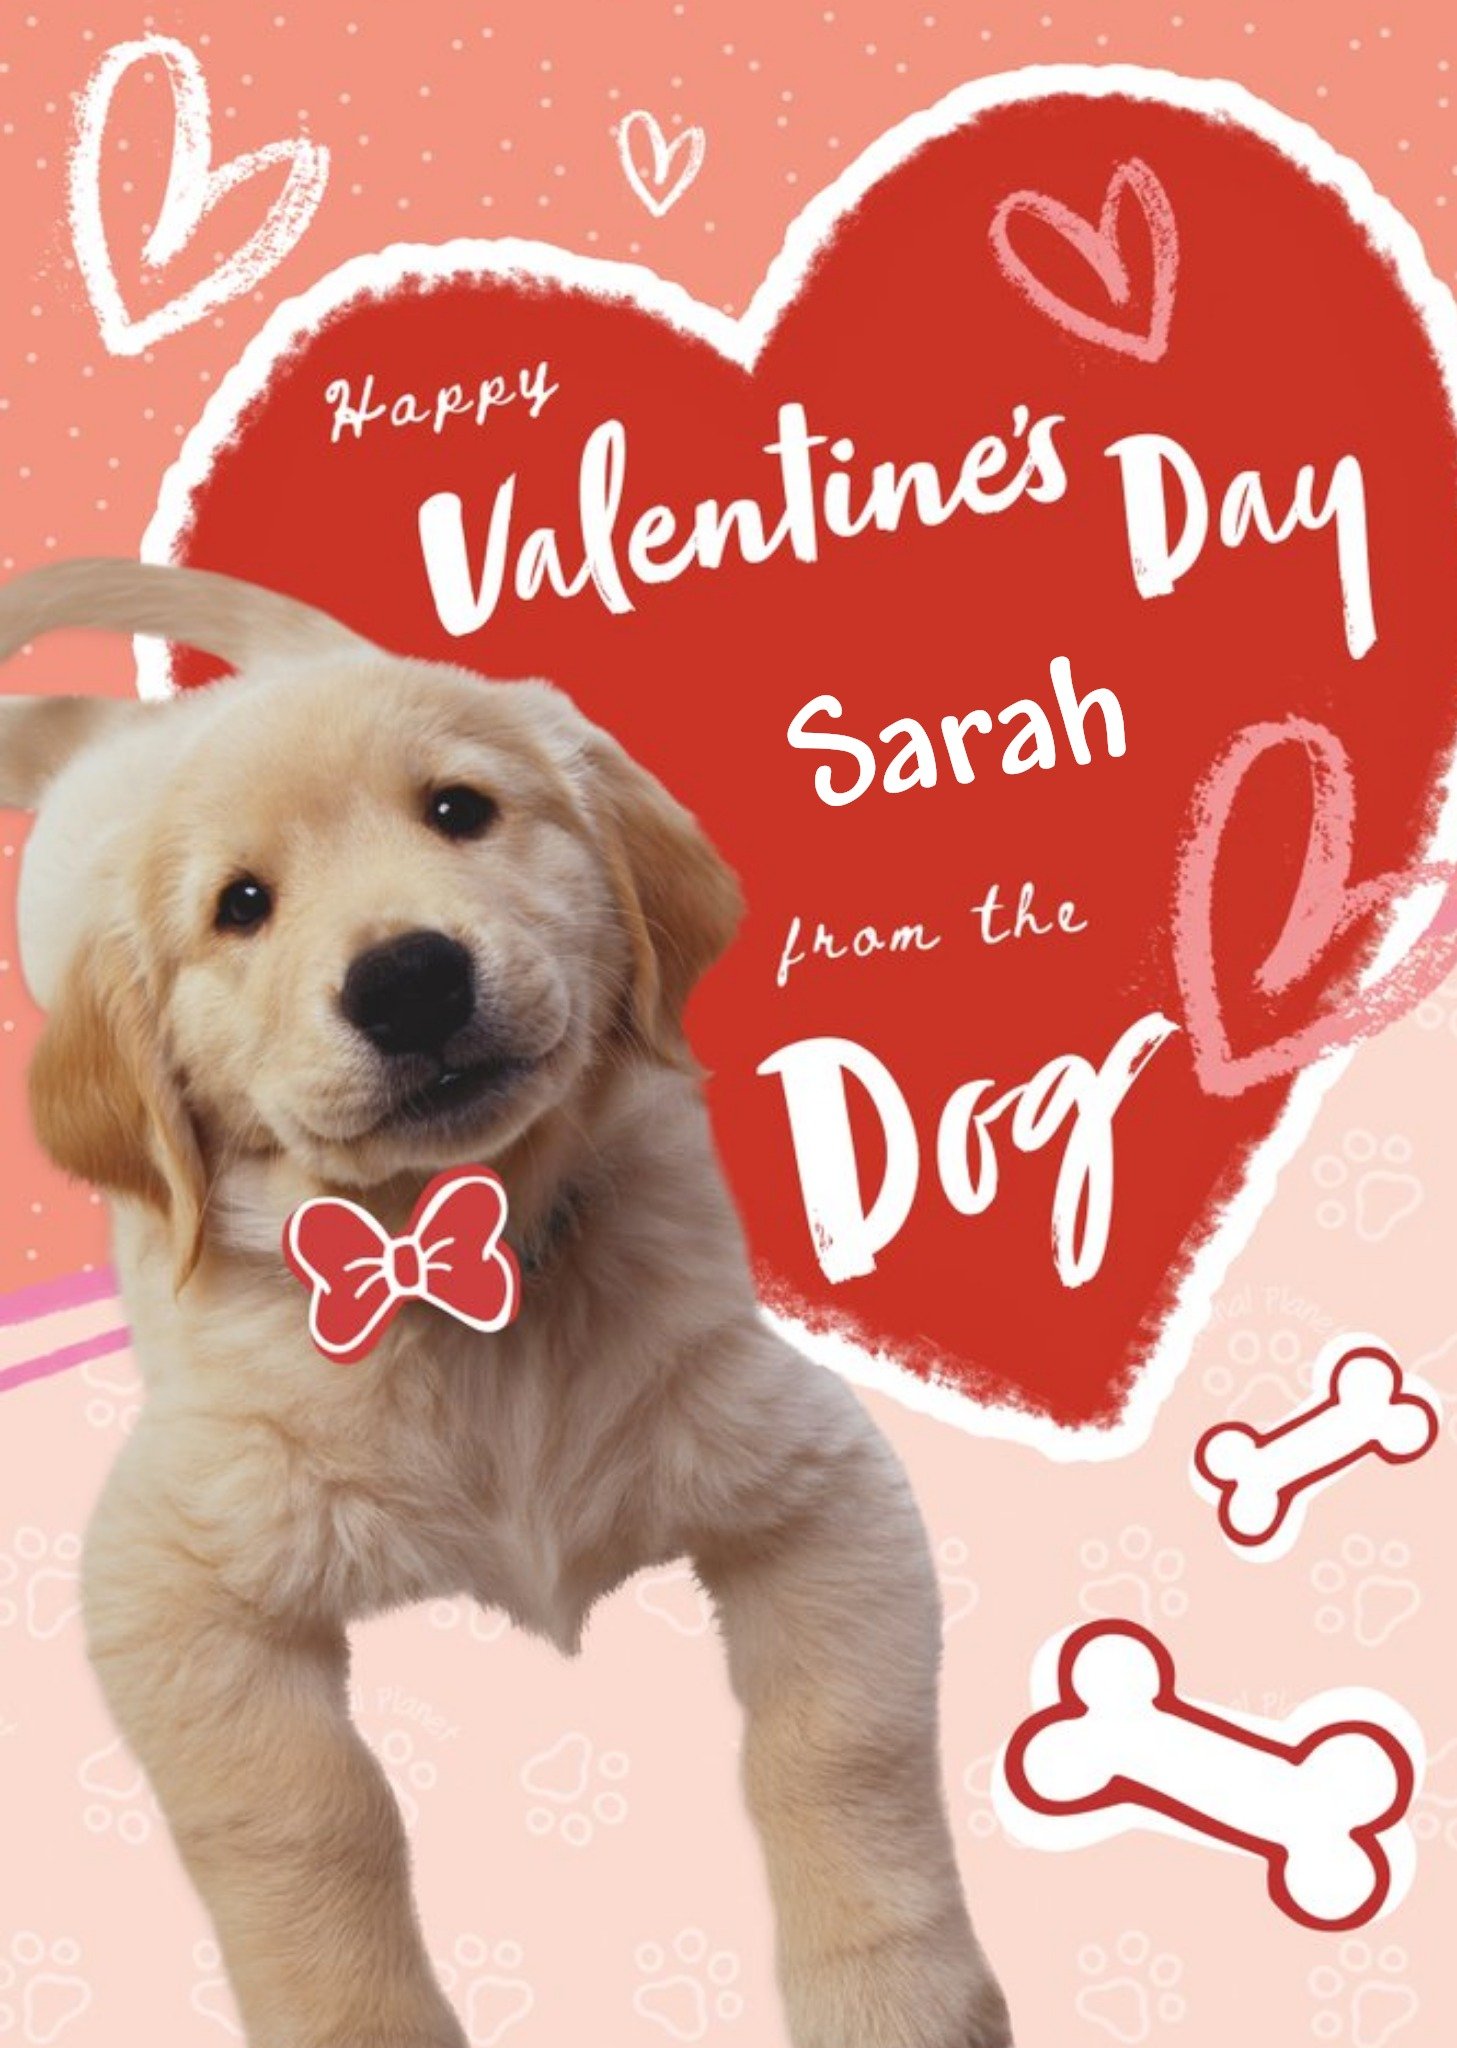 Moonpig Animal Planet From The Dog Valentine's Day Card, Large